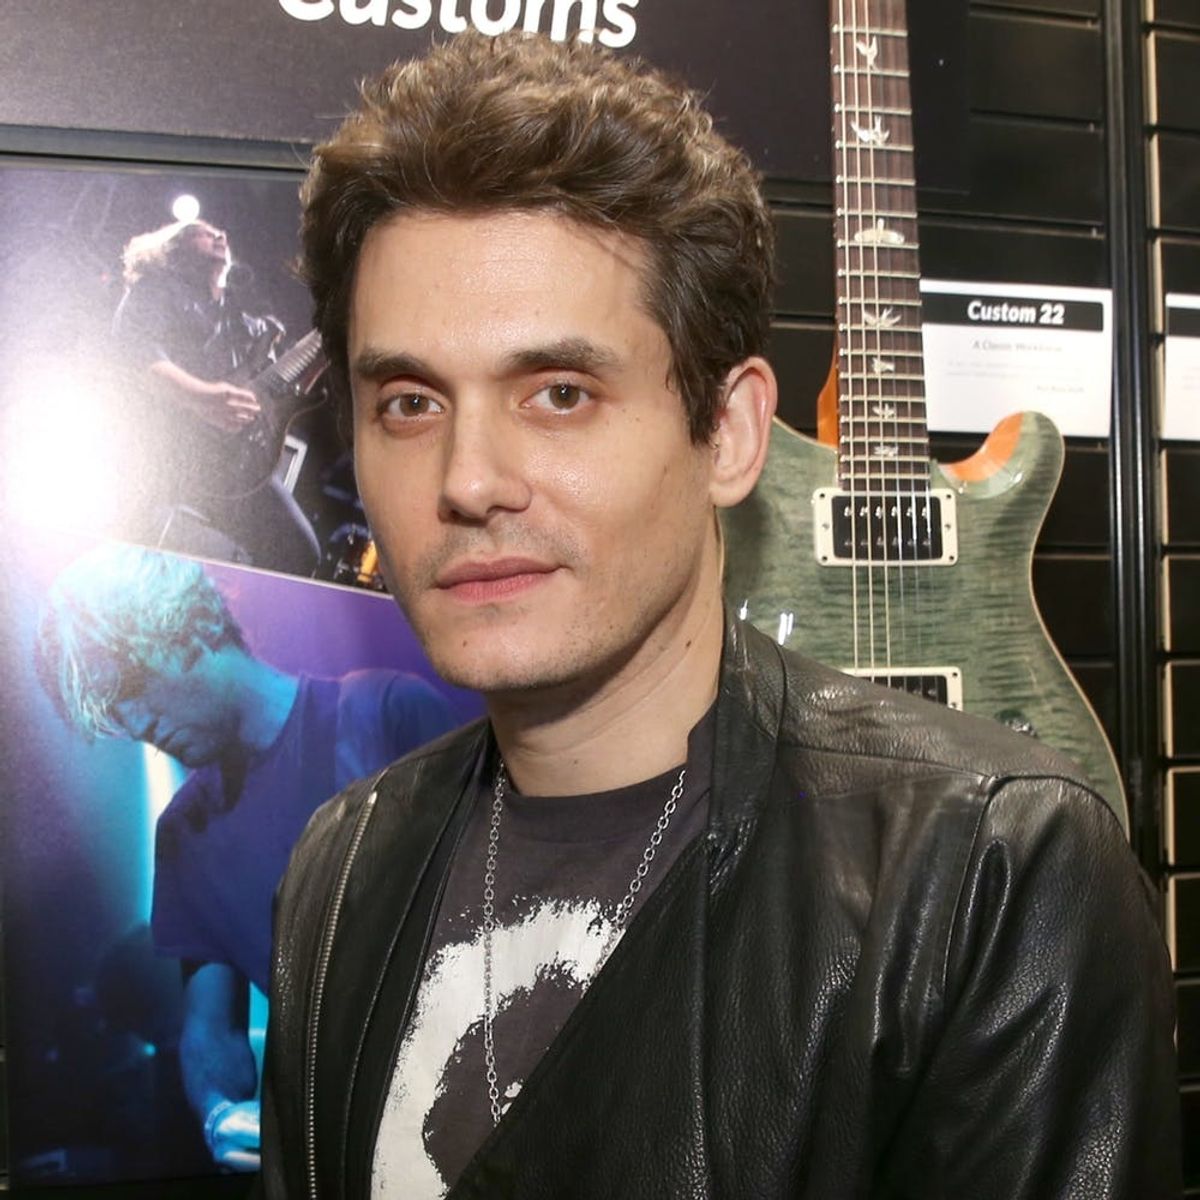 John Mayer Celebrates One Year Alcohol-Free With a Personal Message to Fans